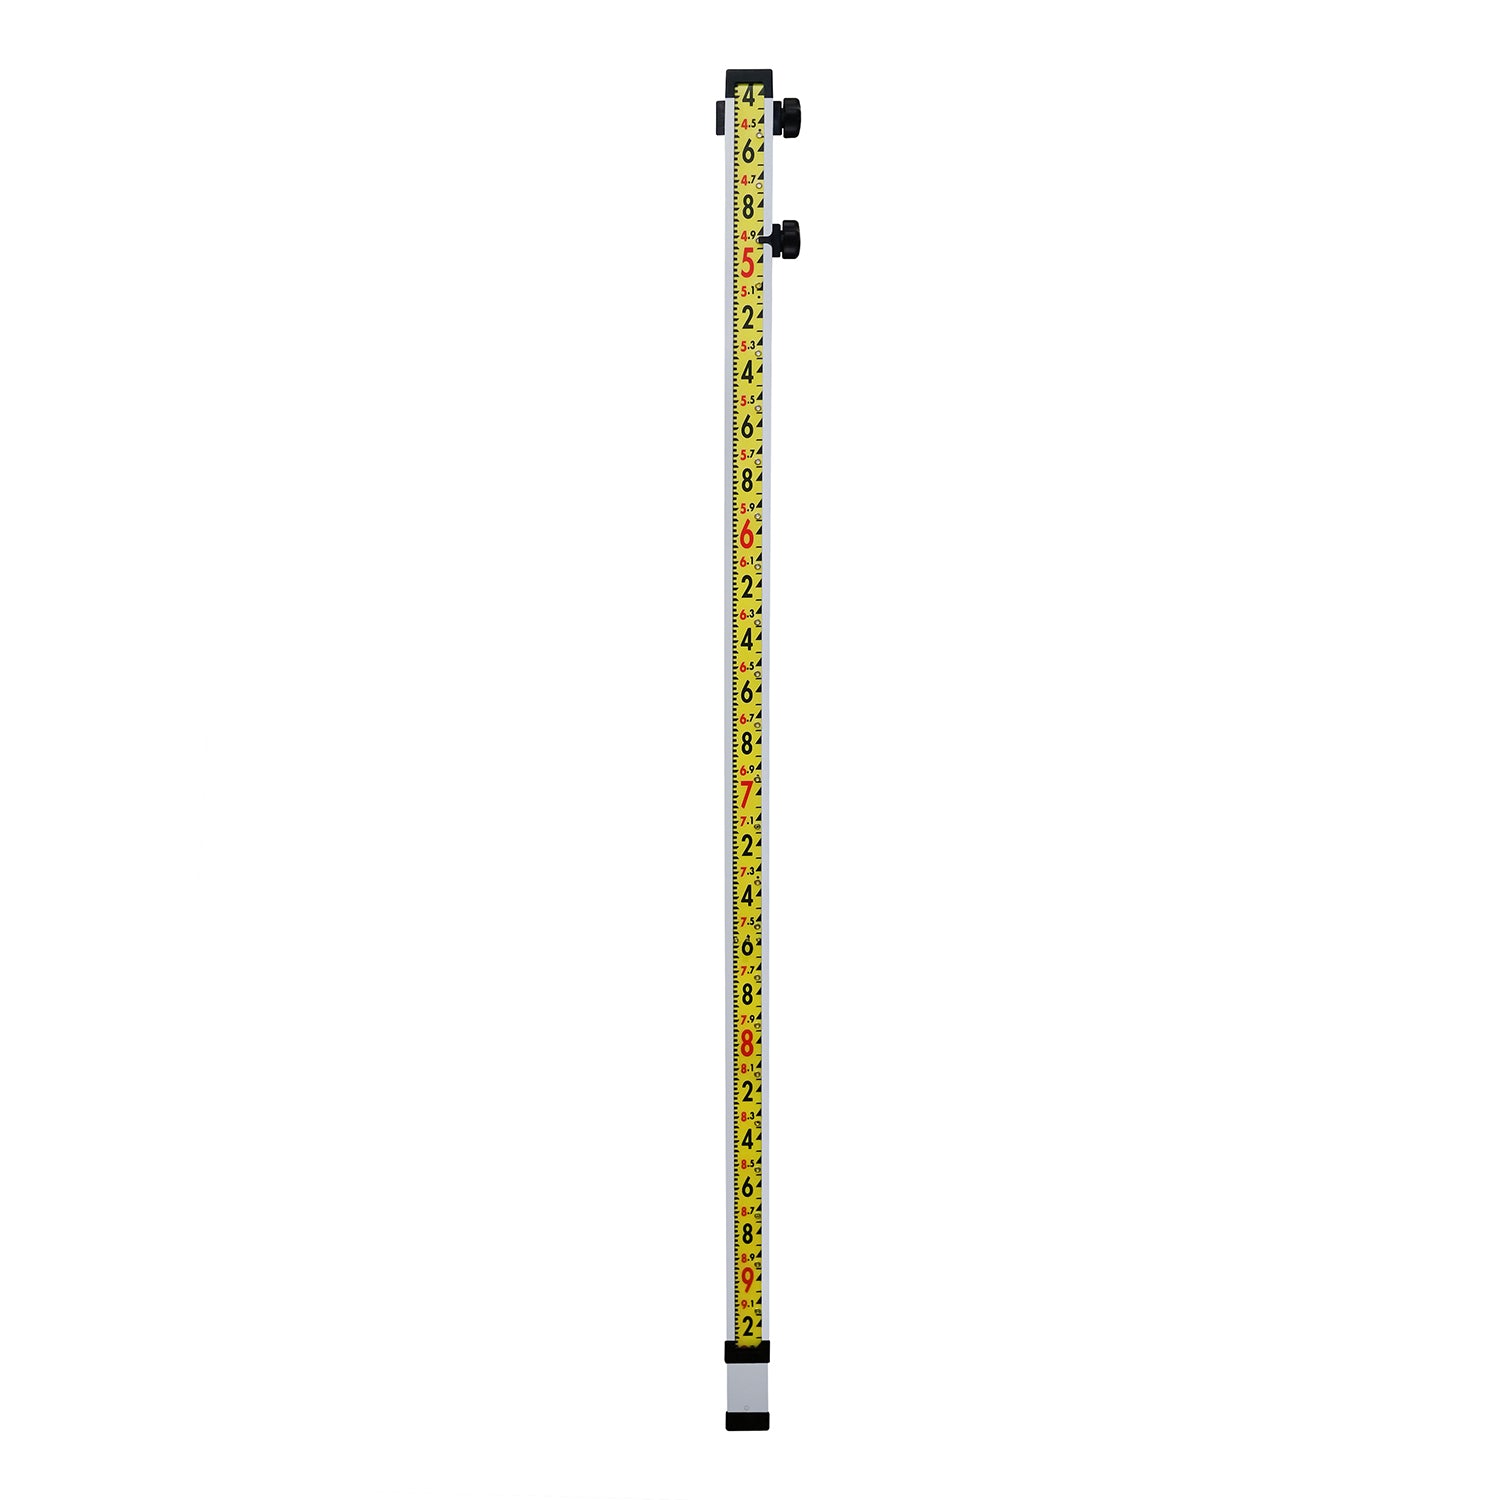 GeoMax 10 Ft Direct Elevation Optical Rod (Ft, 10ths, 100ths) -Rods, Poles & Accessories- eGPS Solutions Inc.